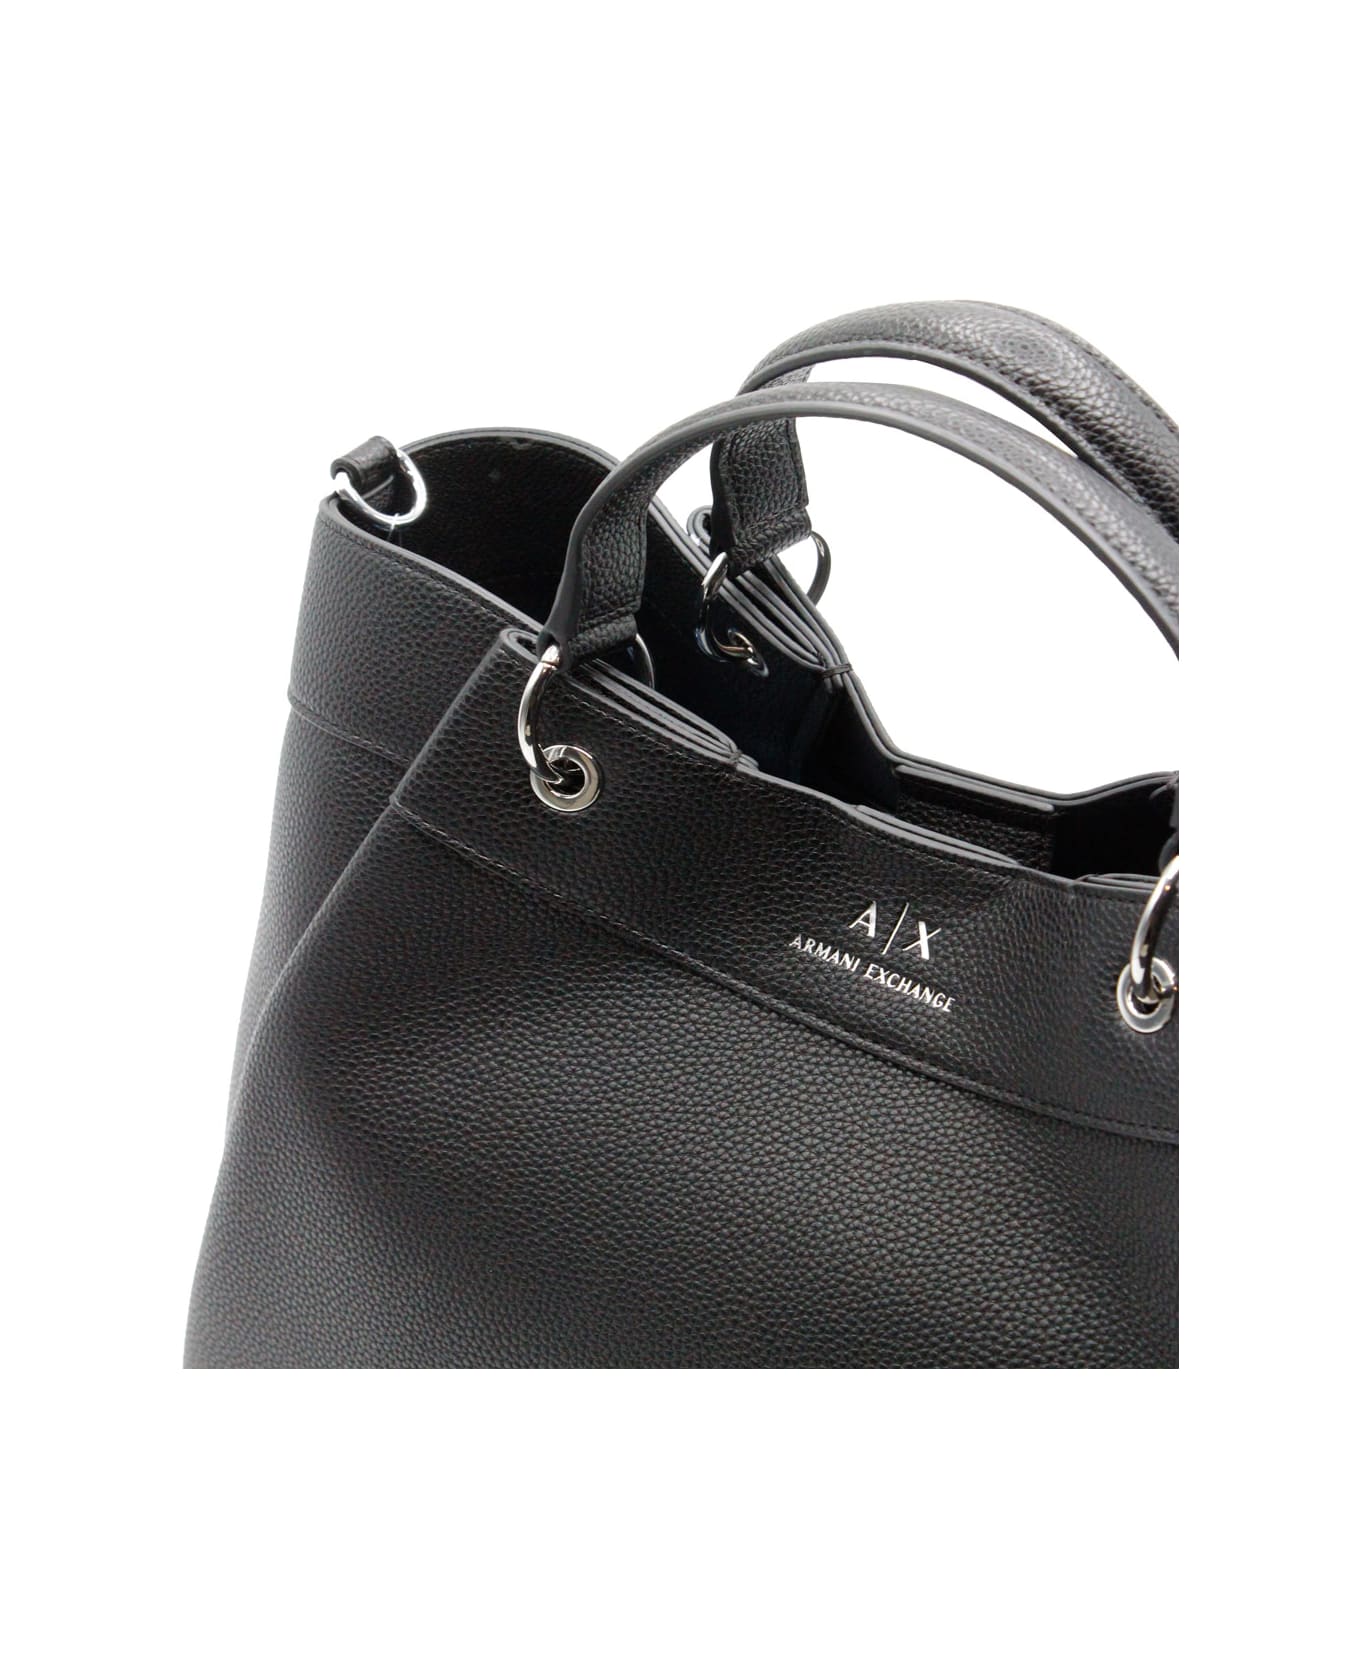 Armani Collezioni Handbag And Shoulder Bag Made Of Soft Faux Leather With Closure Button And Front Logo. Internal Pockets. - Black トートバッグ